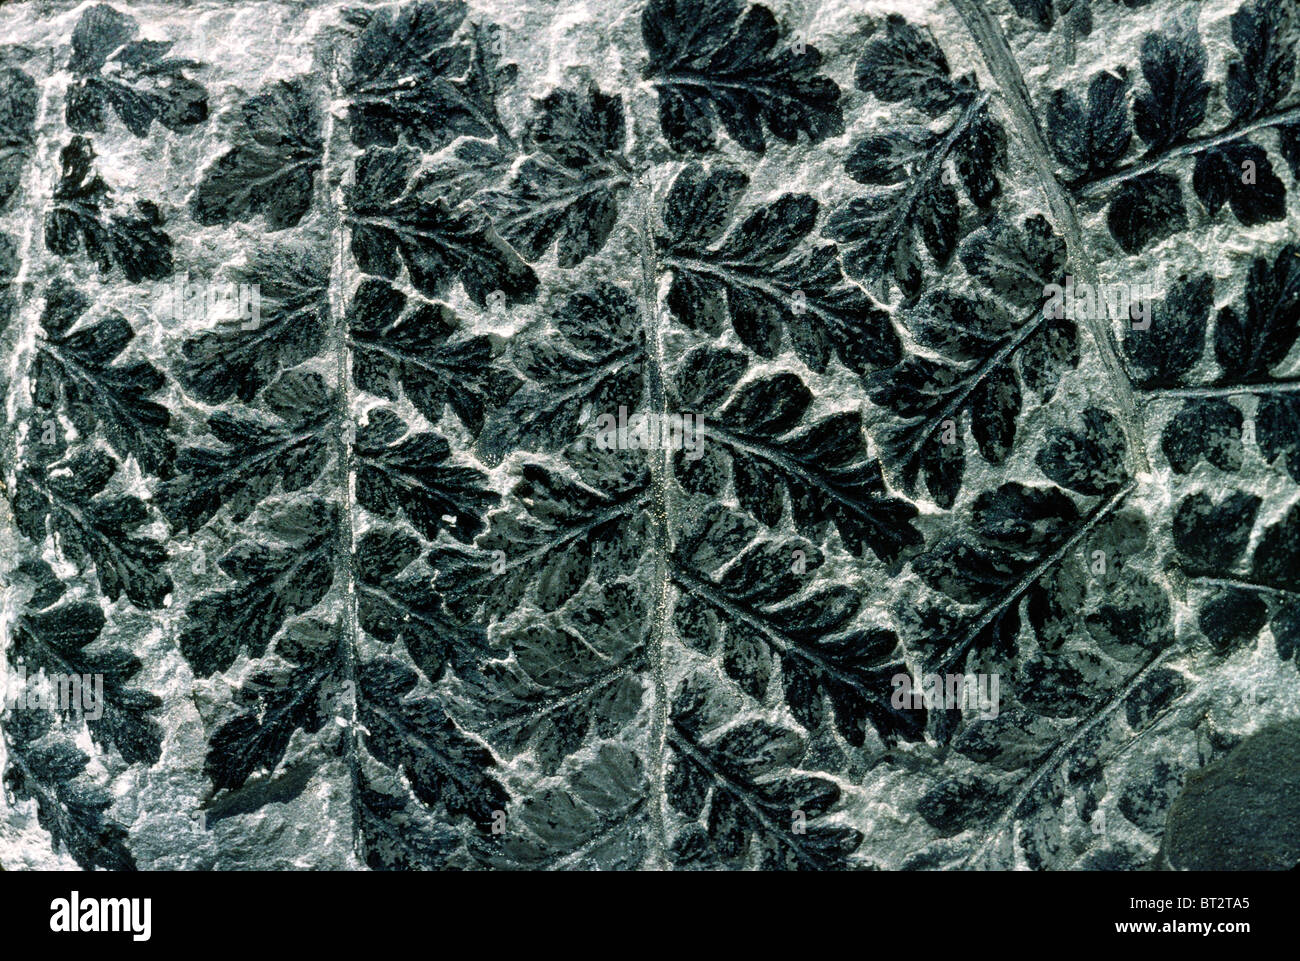 Fossilised fern of type Sphenopteris preserved in Carboniferous coal sample 300 million years old. Excellent example Stock Photo